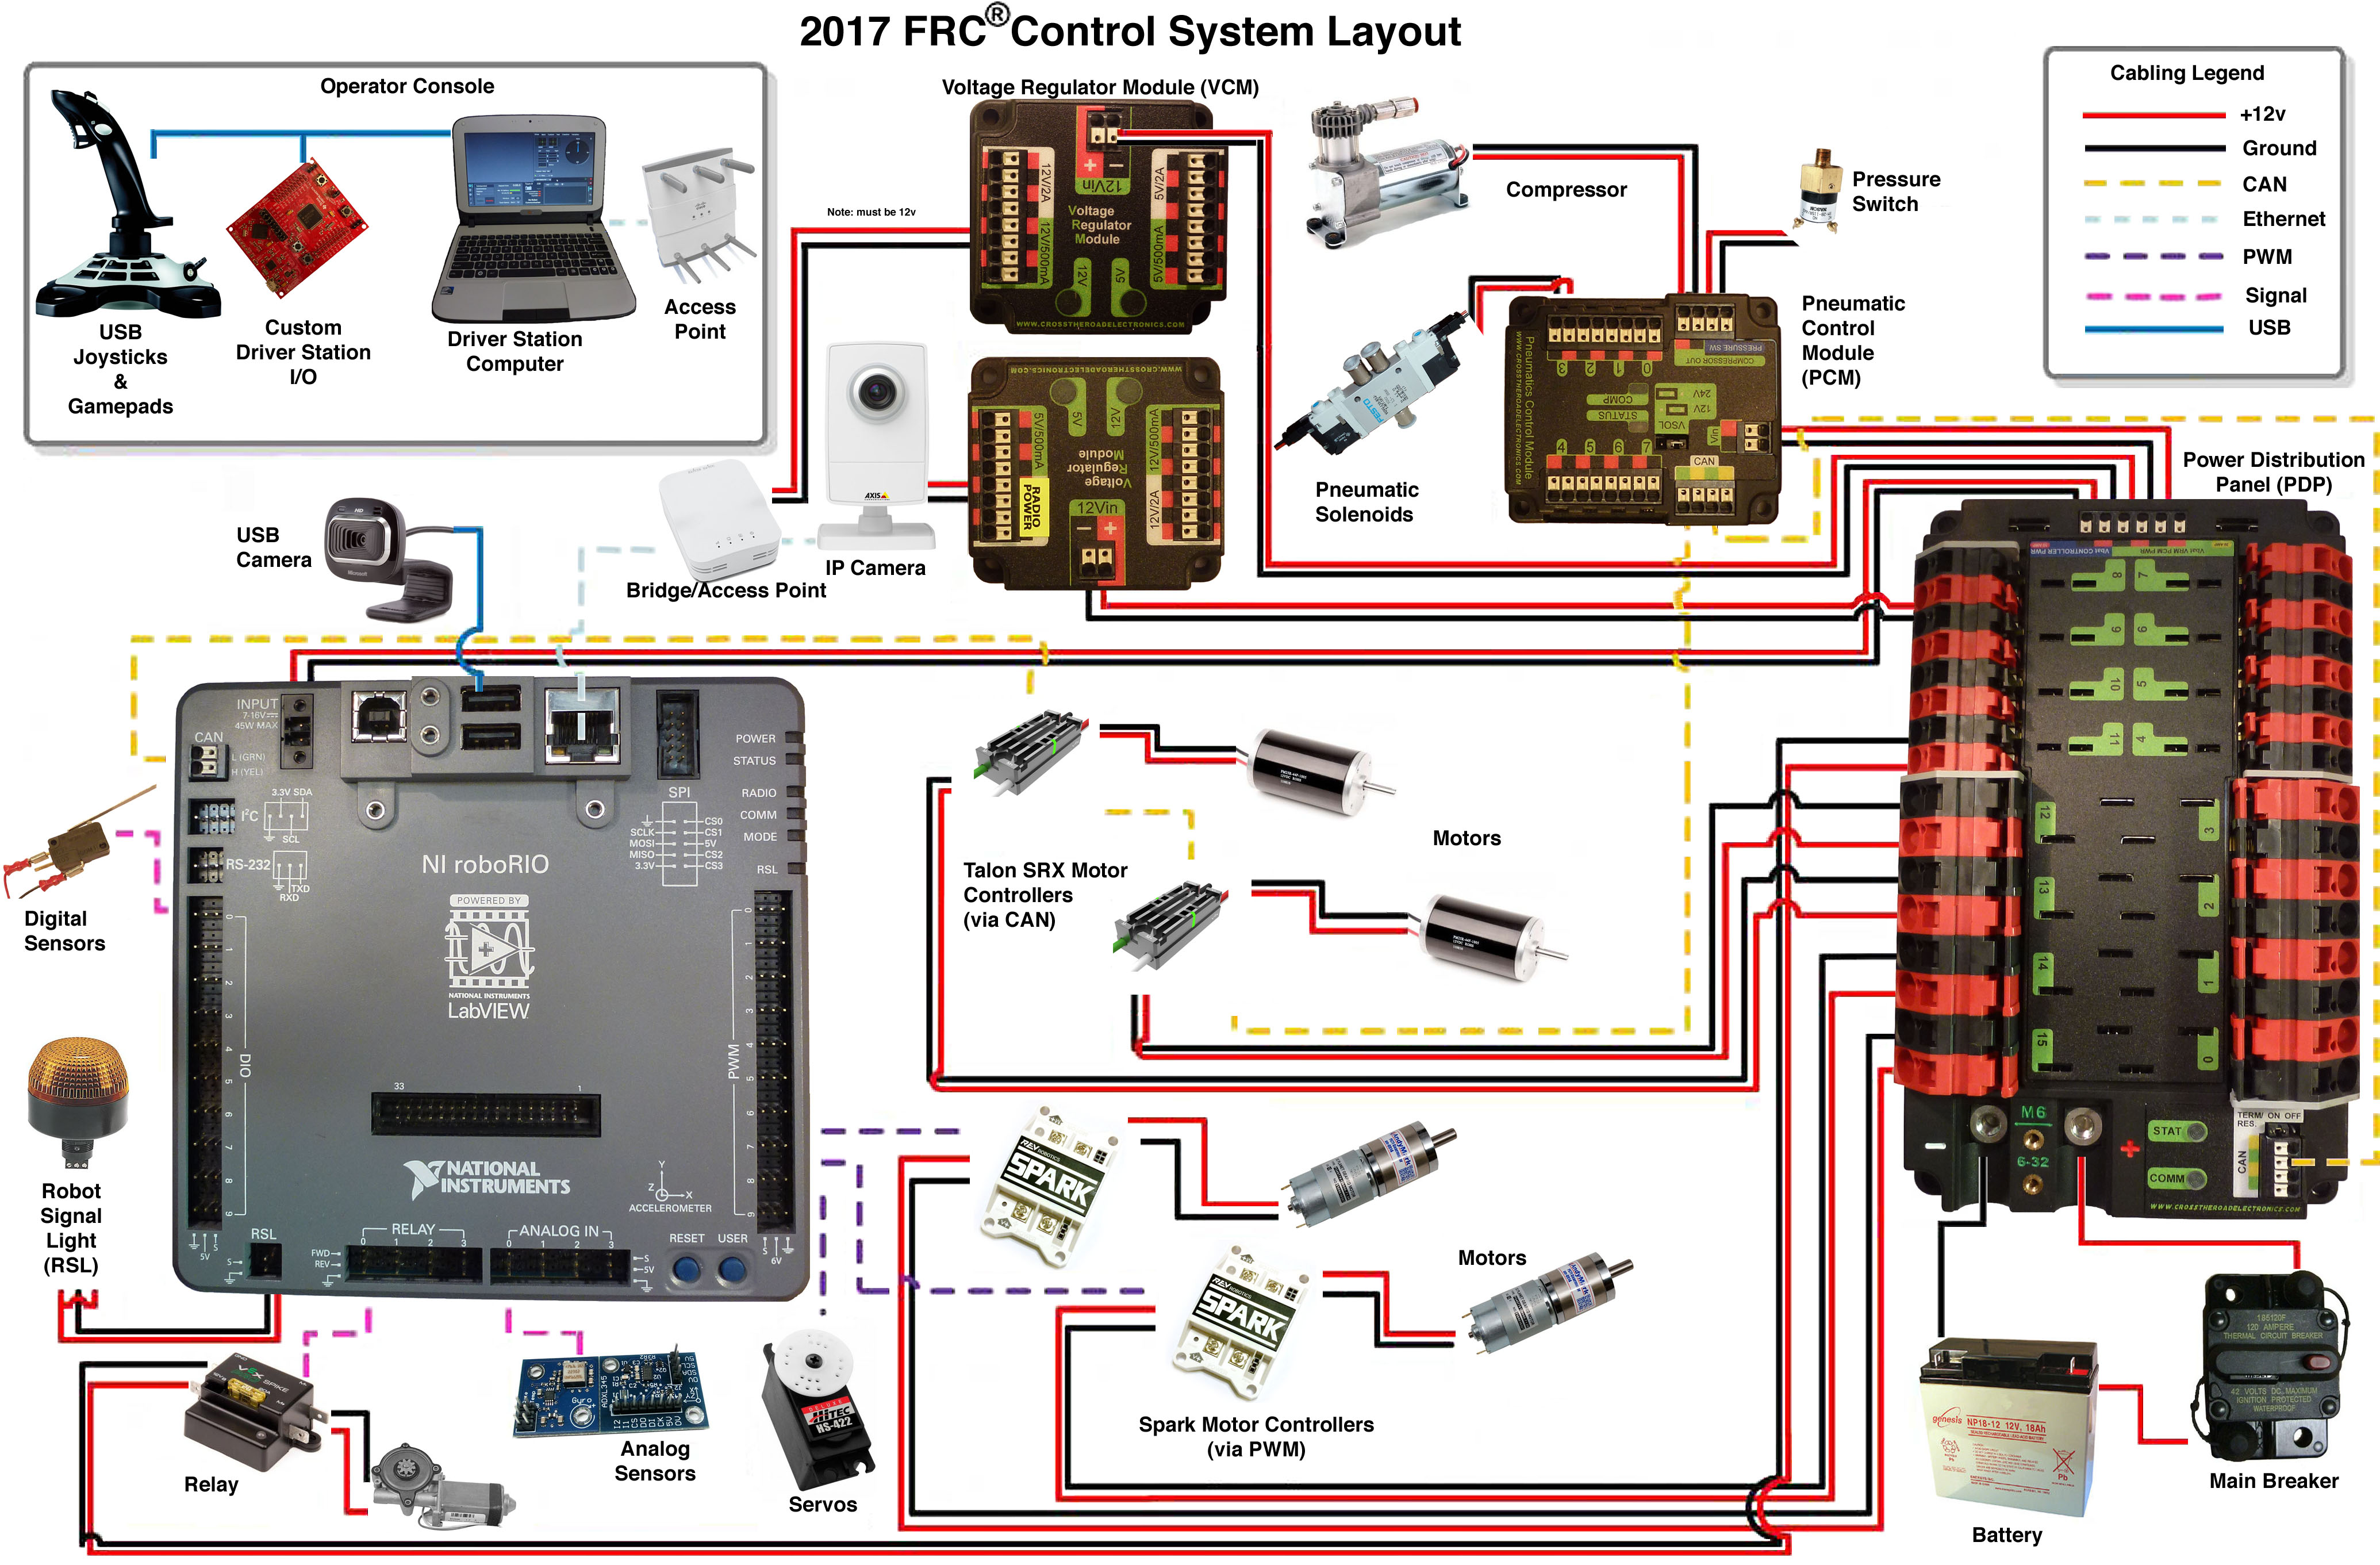 Team358.org - Robotic Eagles - FIRST® Robotics Competition frc wiring diagram 2015 